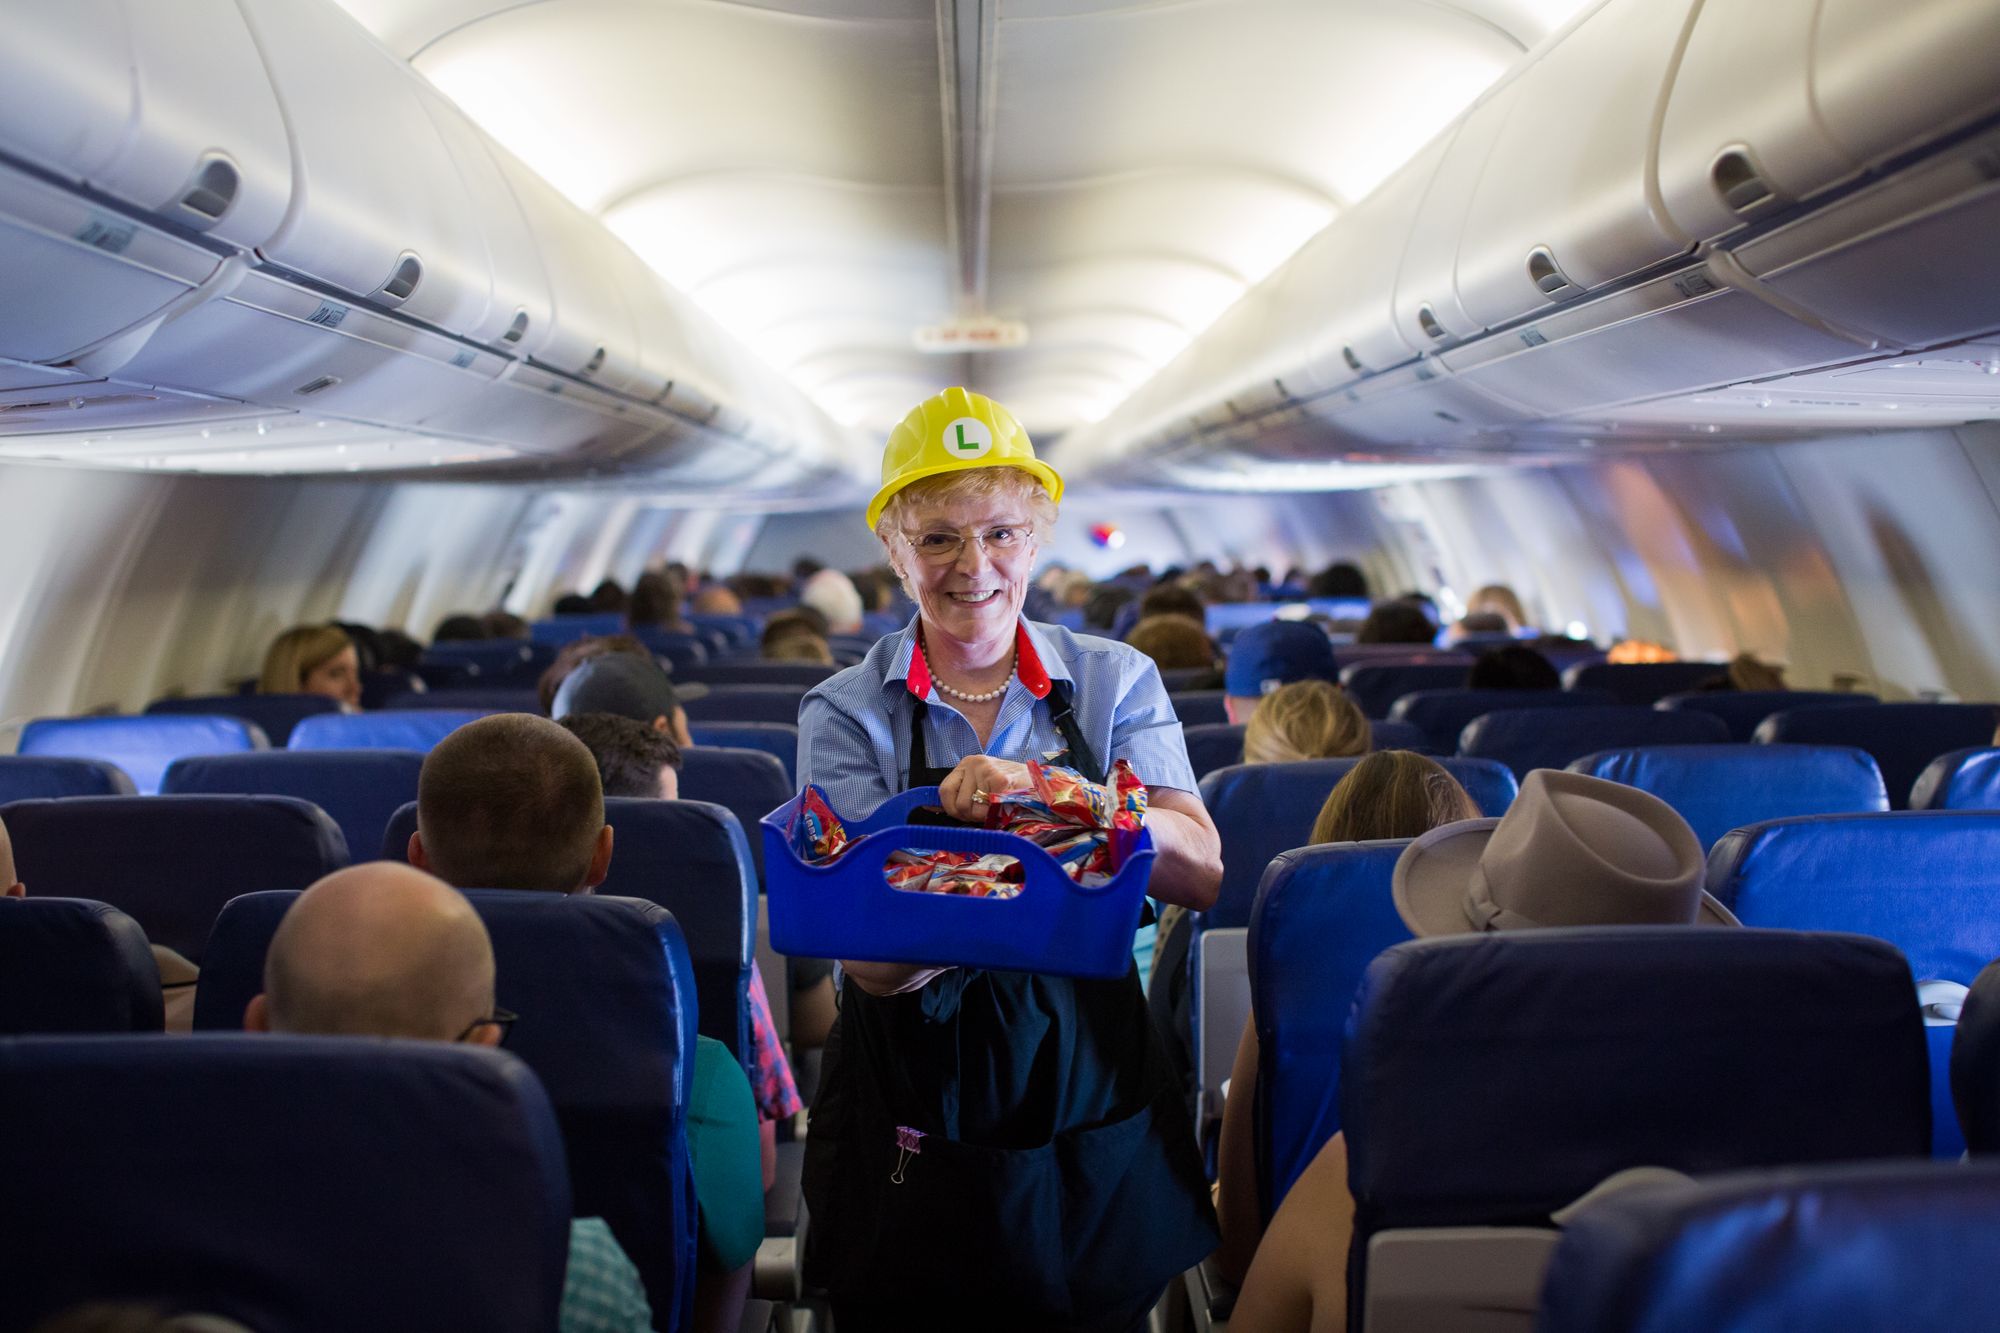 southwest airline career opportunities